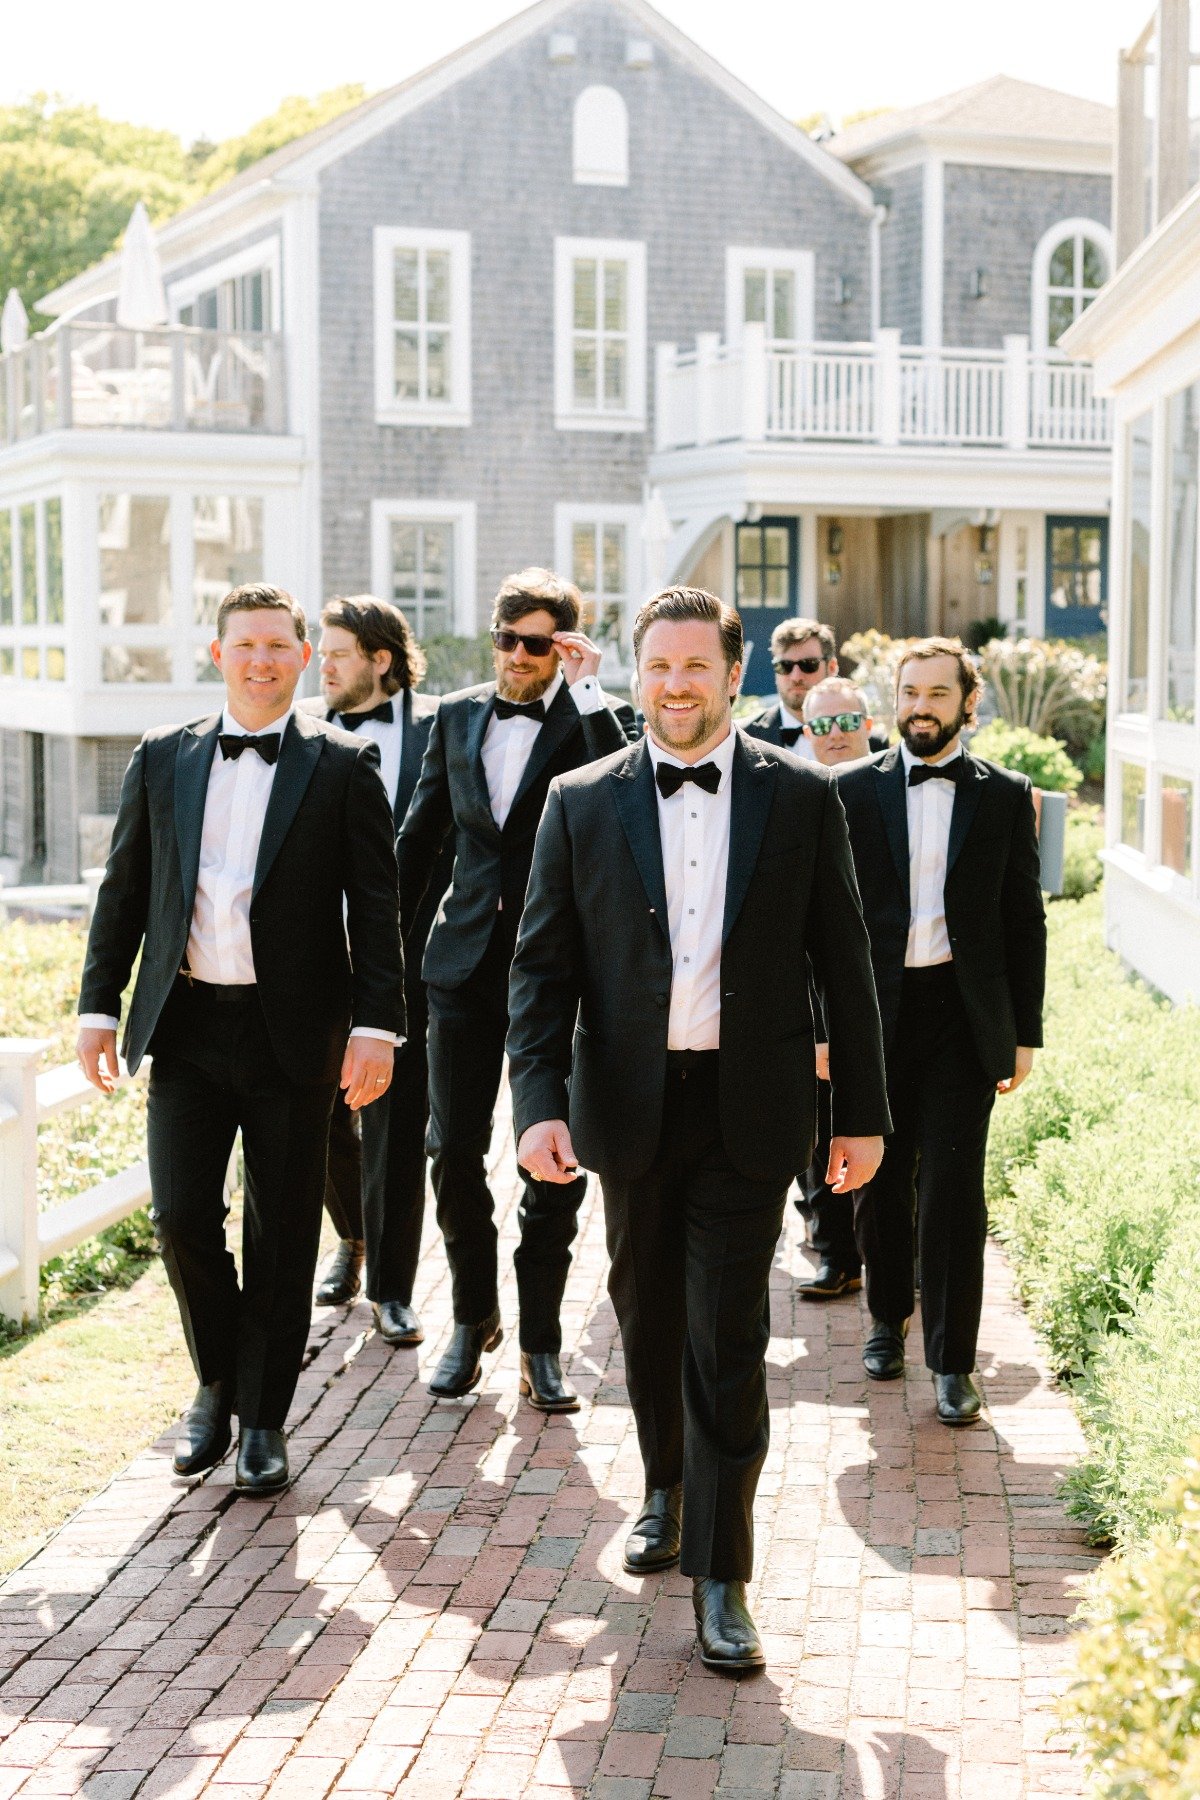 Timeless Cape Cod groomsmen in classic black and white tuxedos